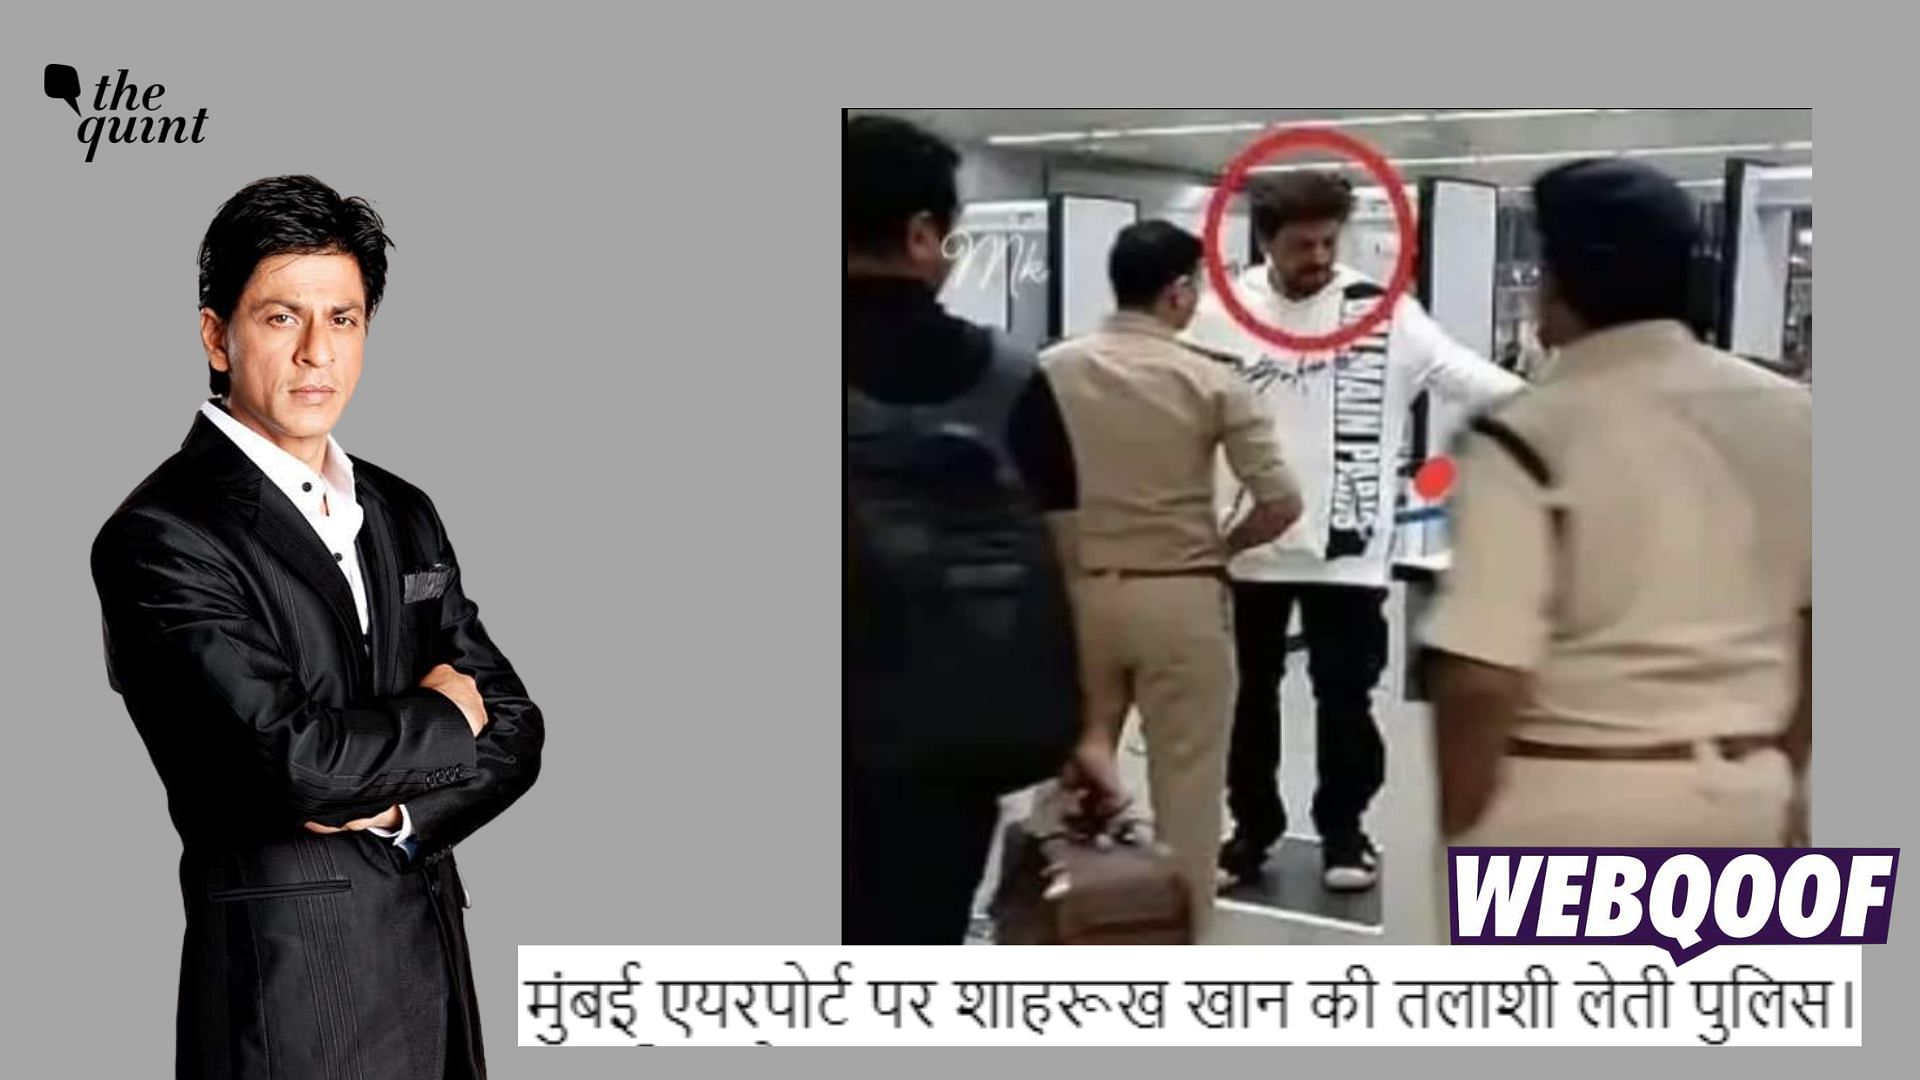 <div class="paragraphs"><p>Fact Check | The image showing Shahrukh Khan getting checked by security dates back to 2019.</p></div>